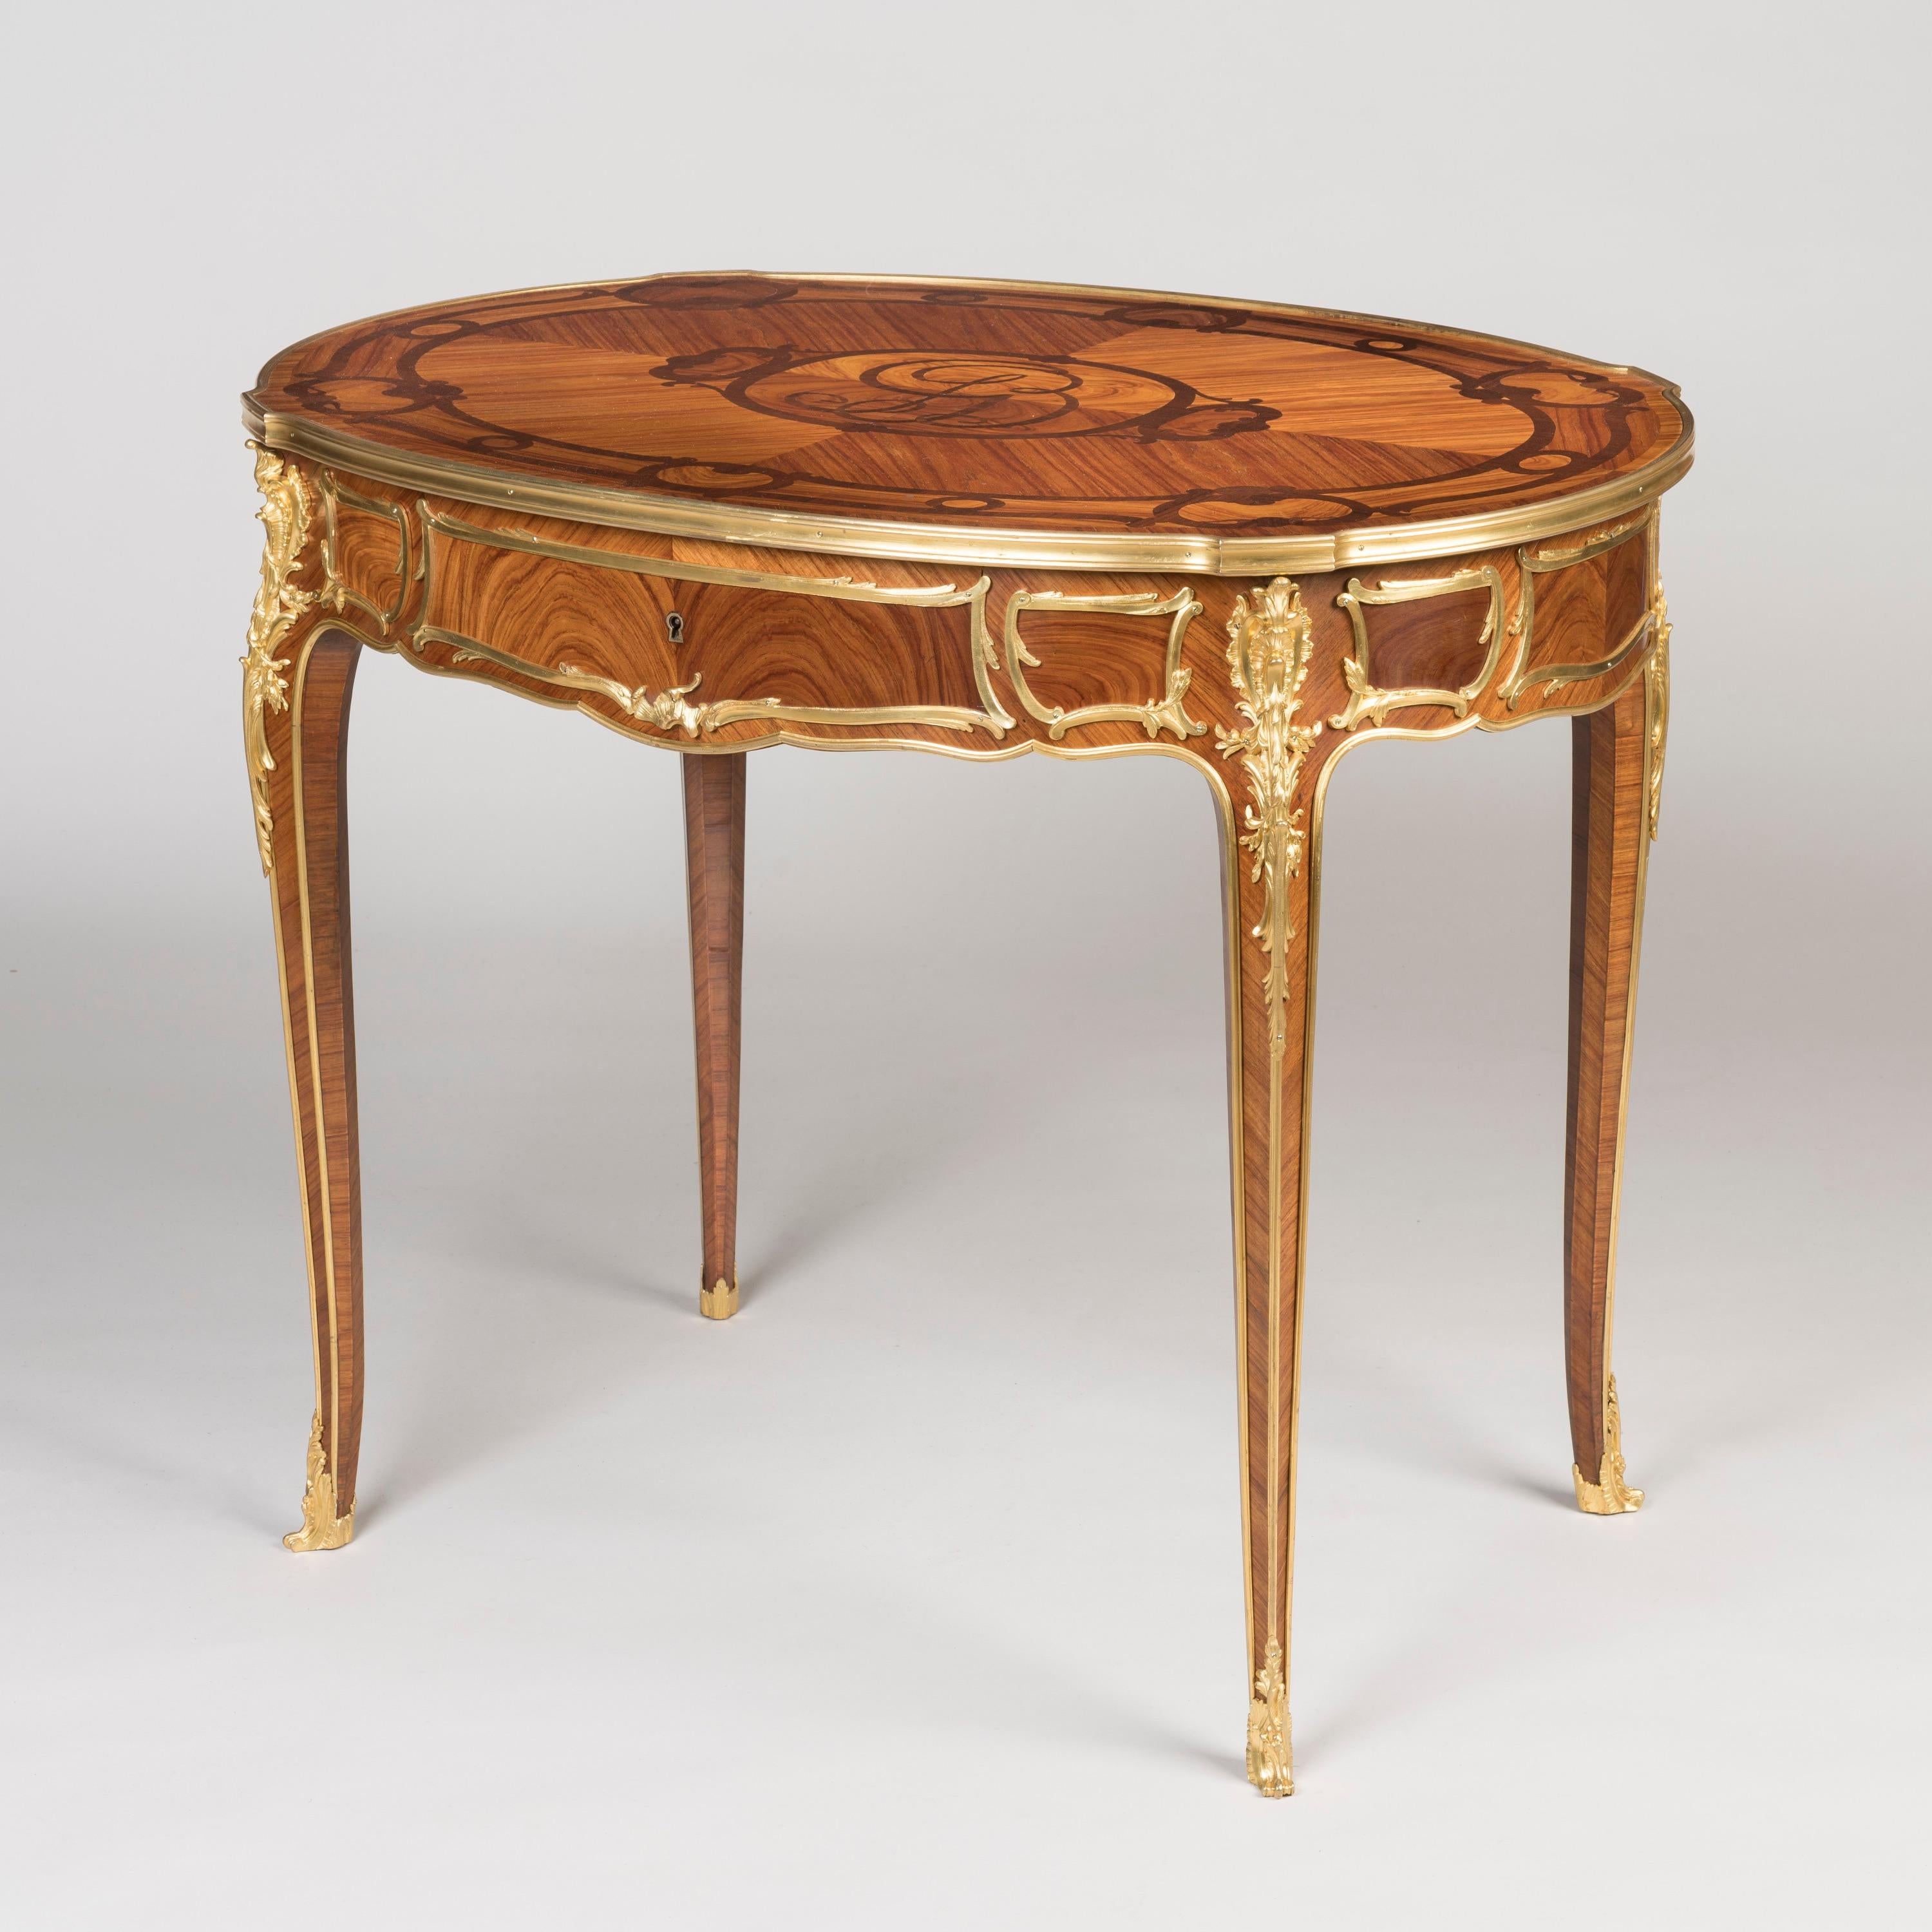 An Elegant Tulipwood Table
In the Louis XVI Style

Veneered in a beautifully figured tulipwood with a contrasting kingwood inlay and decorated with mercury gilt bronze mounts; the oval table supported on slender cabriole legs with ormolu sabots